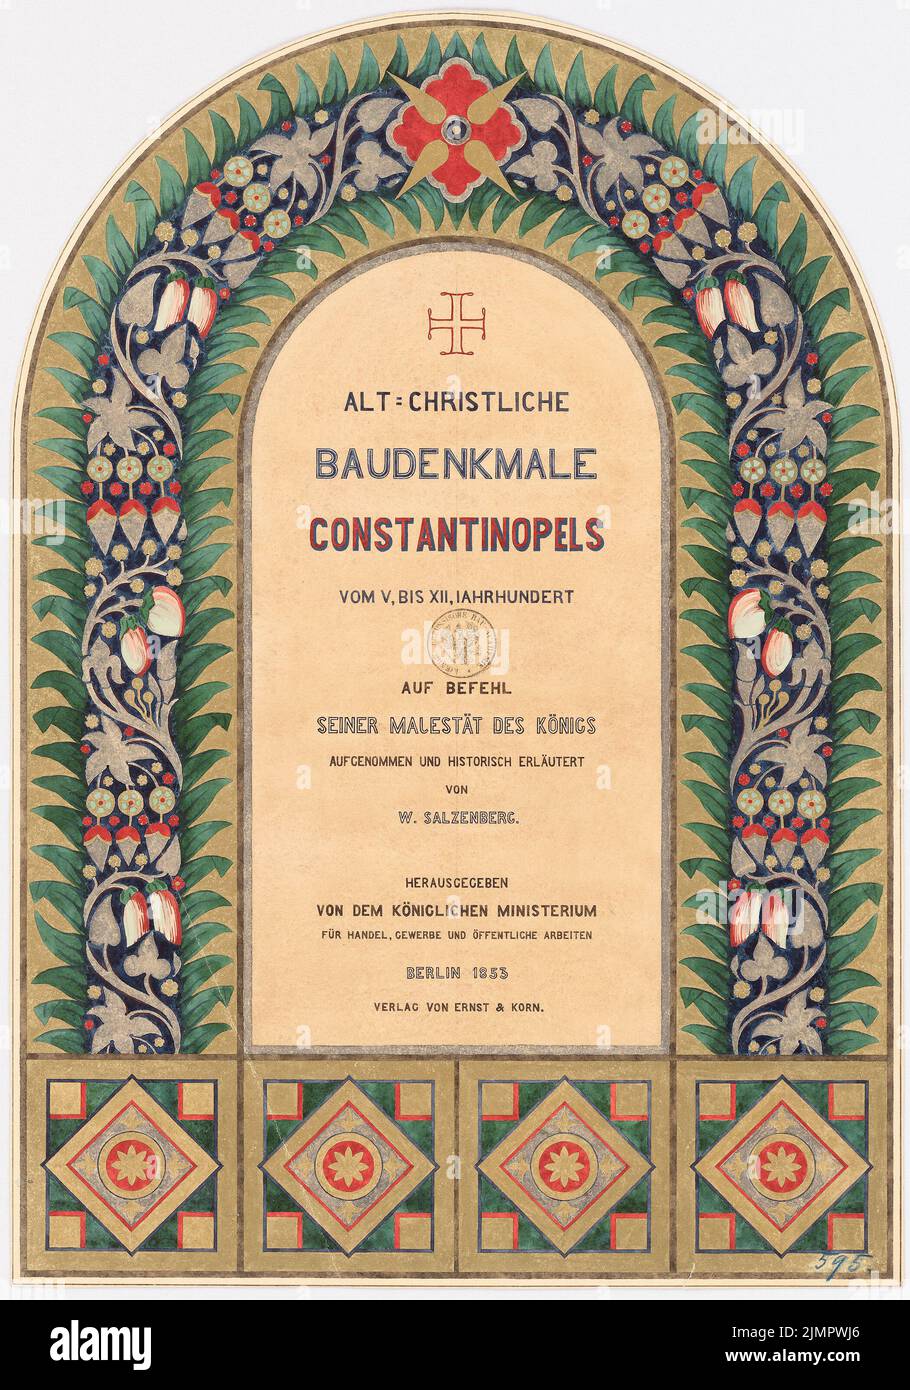 Salzenberg Wilhelm (1803-1887), 'Old Christian monuments of Constantinople [...]': Titleblatt (1853): Book title sheet. Watercolor, gold heighted on paper, 51.9 x 36.3 cm (including scan edges) Salzenberg Wilhelm  (1803-1887): Titelblatt (für: Alt-christliche Baudenkmale Konstantinopels) Stock Photo